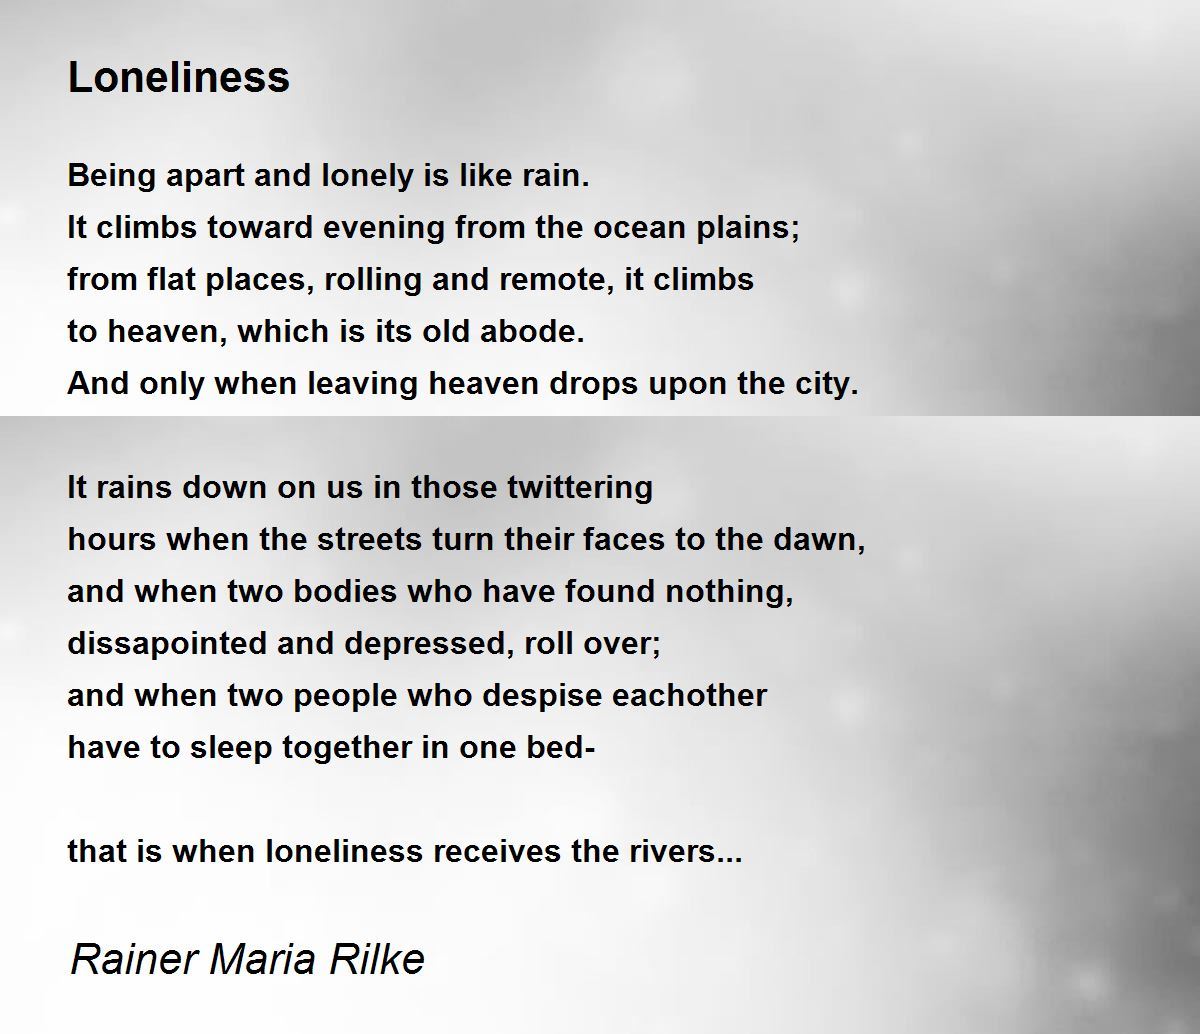 Loneliness - Loneliness Poem by Rainer Maria Rilke